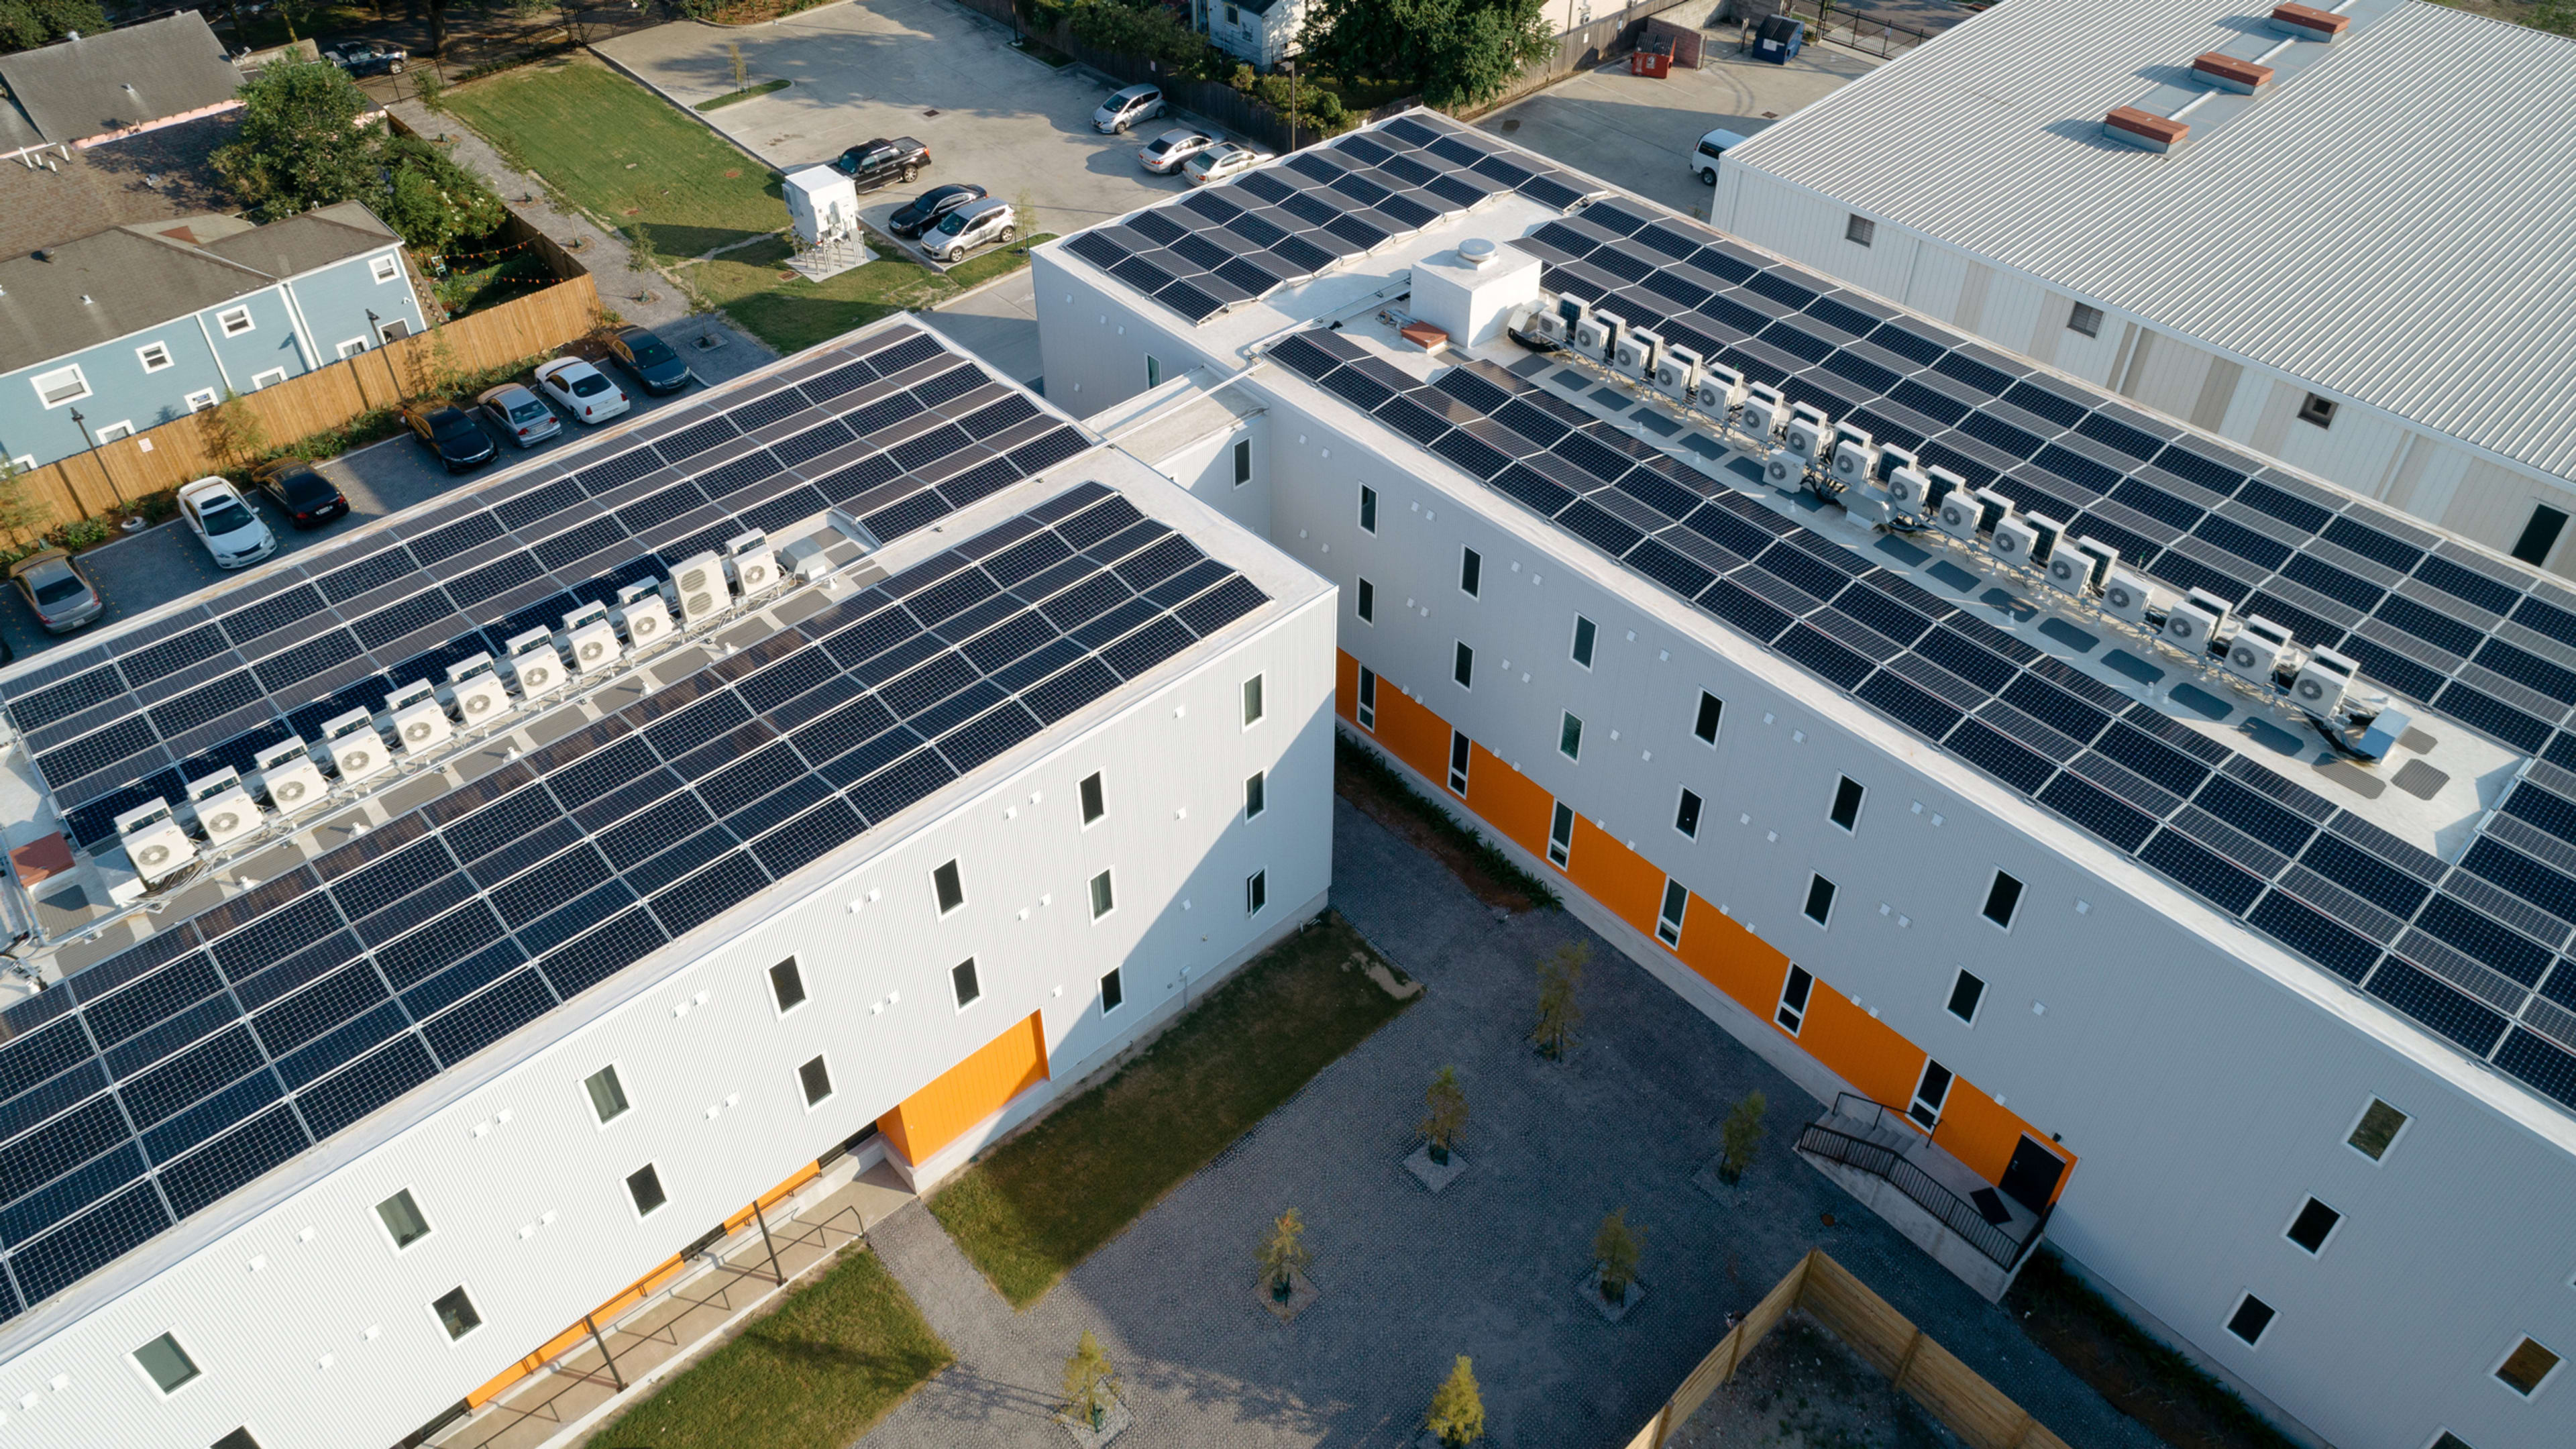 In New Orleans, a solar microgrid is keeping lights on in this affordable apartment building